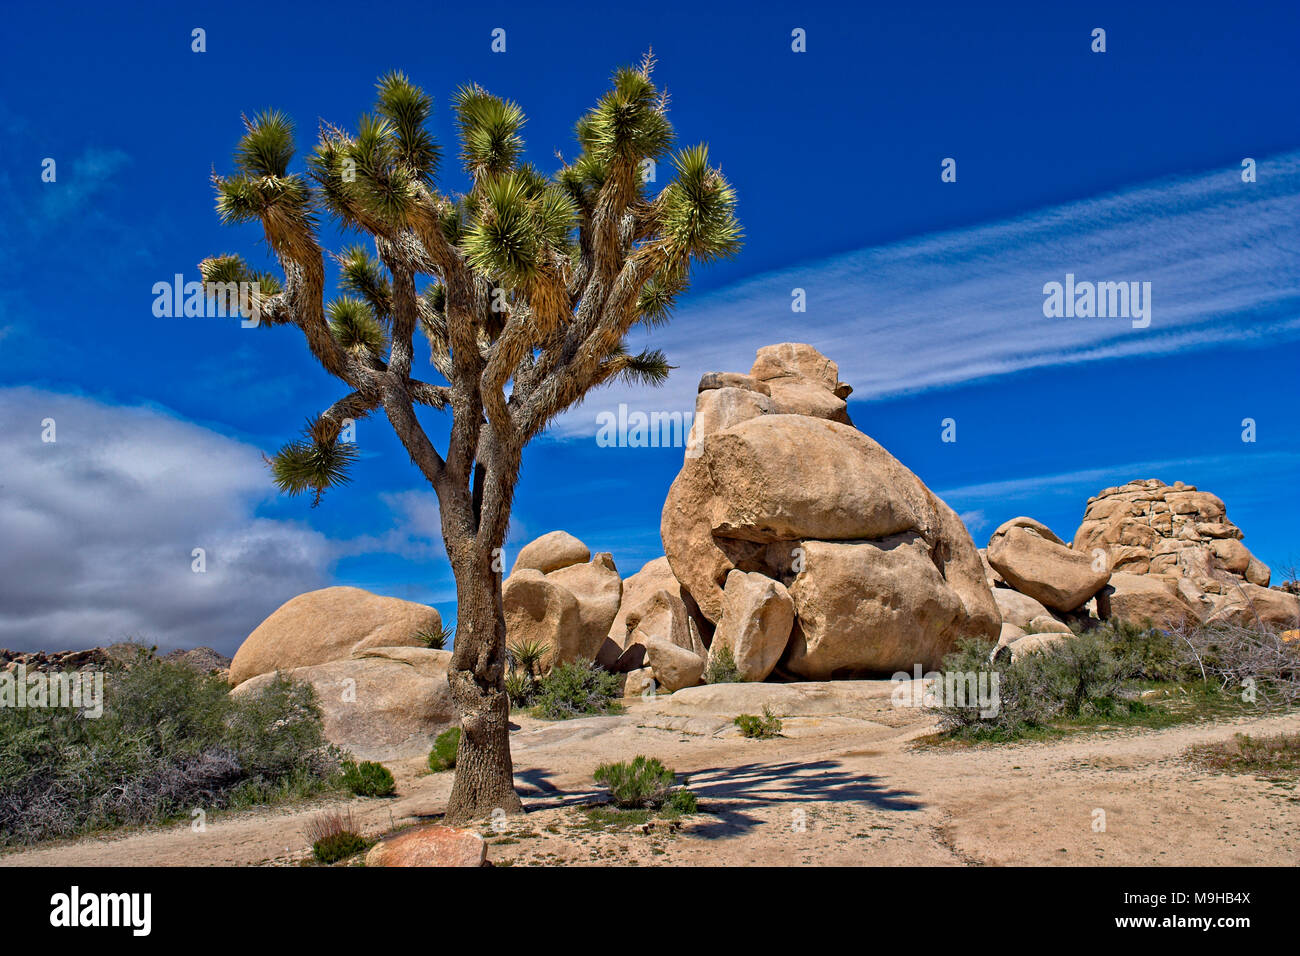 a Single Joshua tree next to Monzogranite rock formations in Joshua Tree National Park in Southern California's Mojave Desert Stock Photo